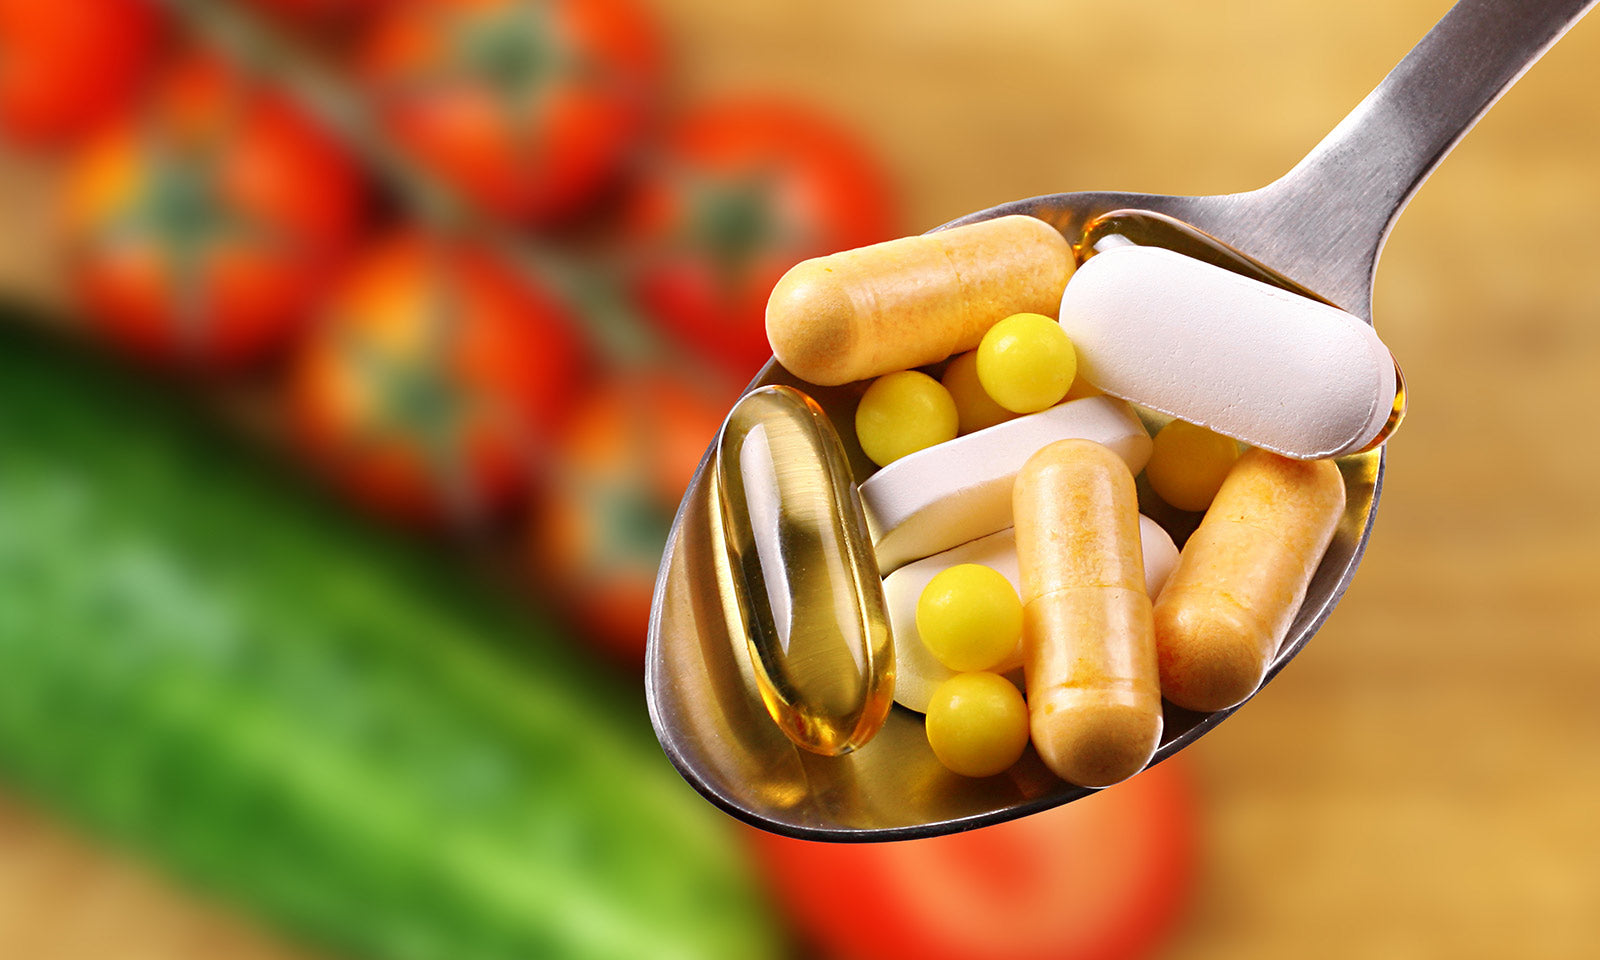 Common myths and misconceptions about vitamin supplements